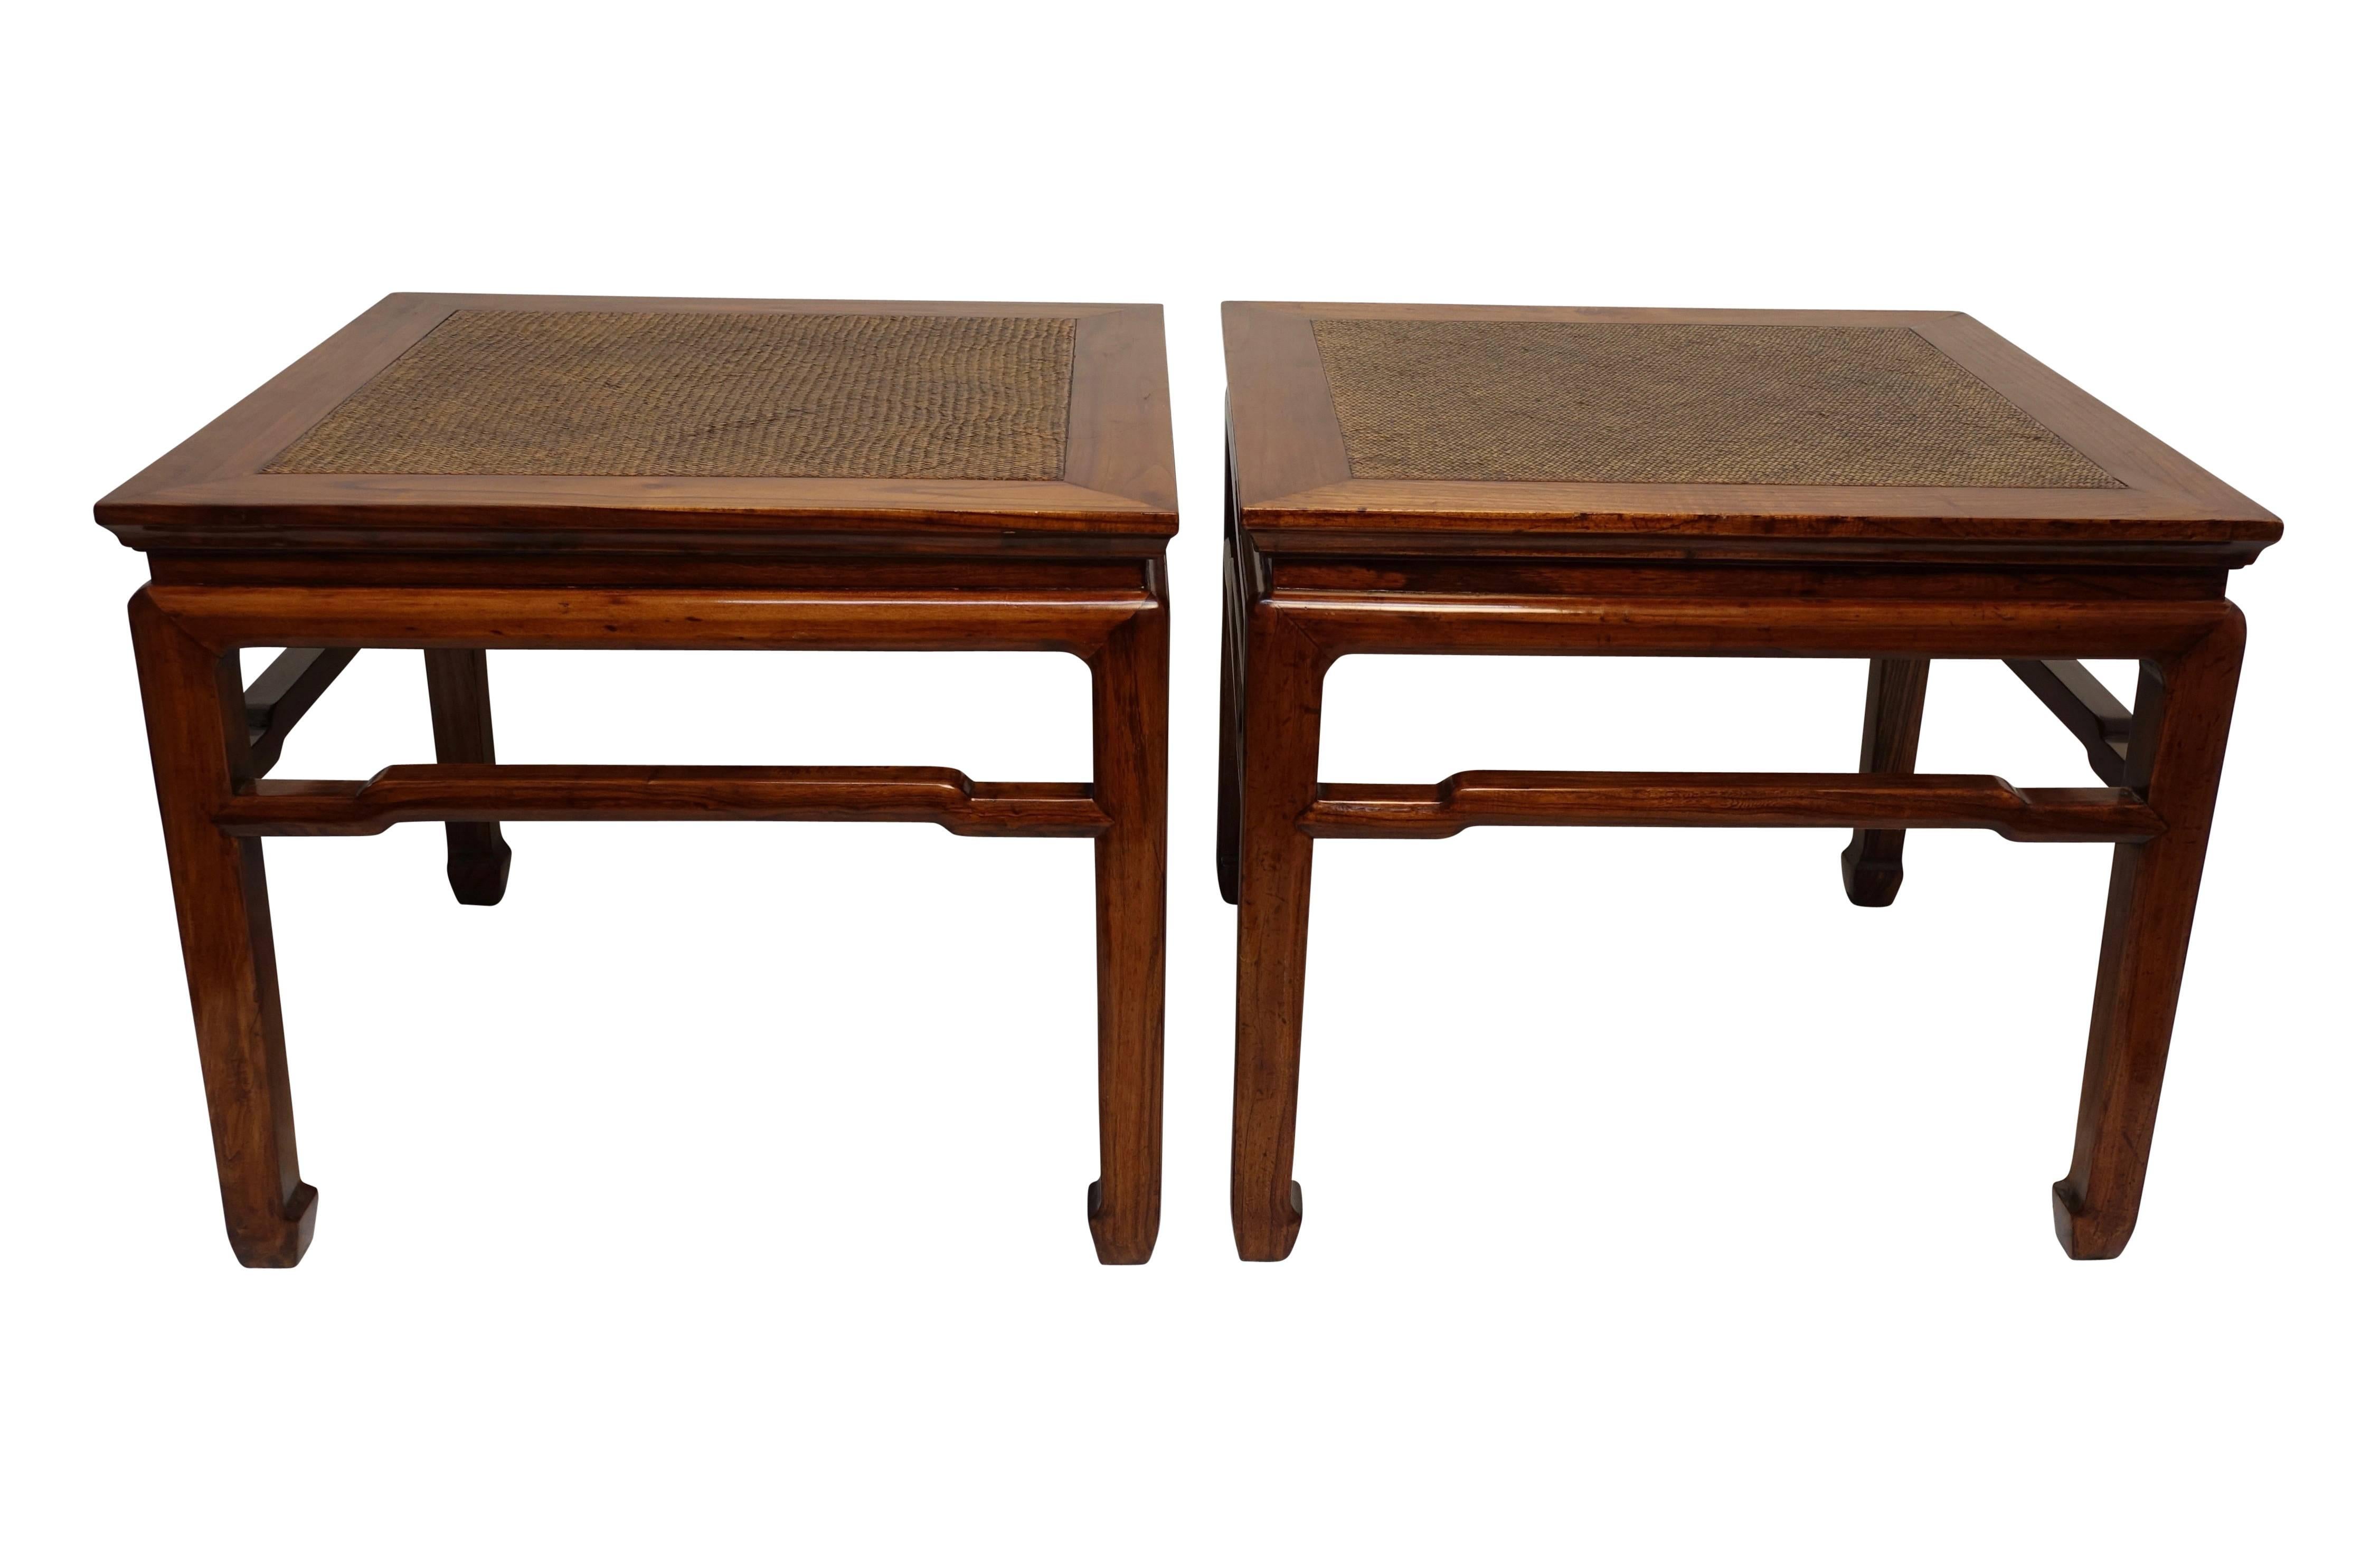 Pair of Chinese Side or End Tables with Woven Panels, Mid-19th Century 3